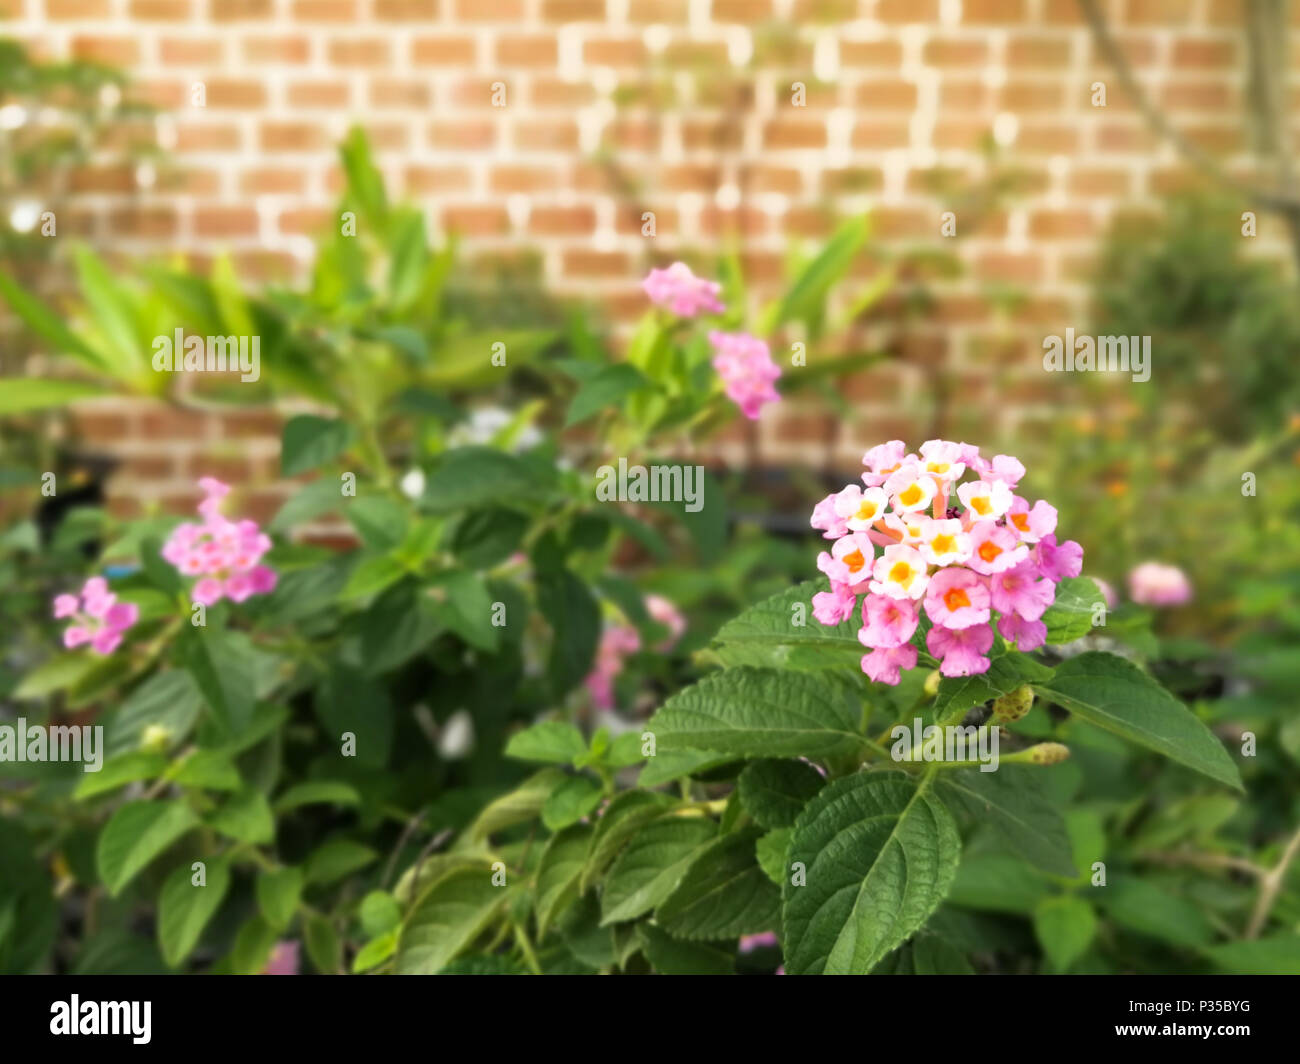 Pink flowers in the garden at evening (Lantana camara L.) on brick background with vision blur Stock Photo